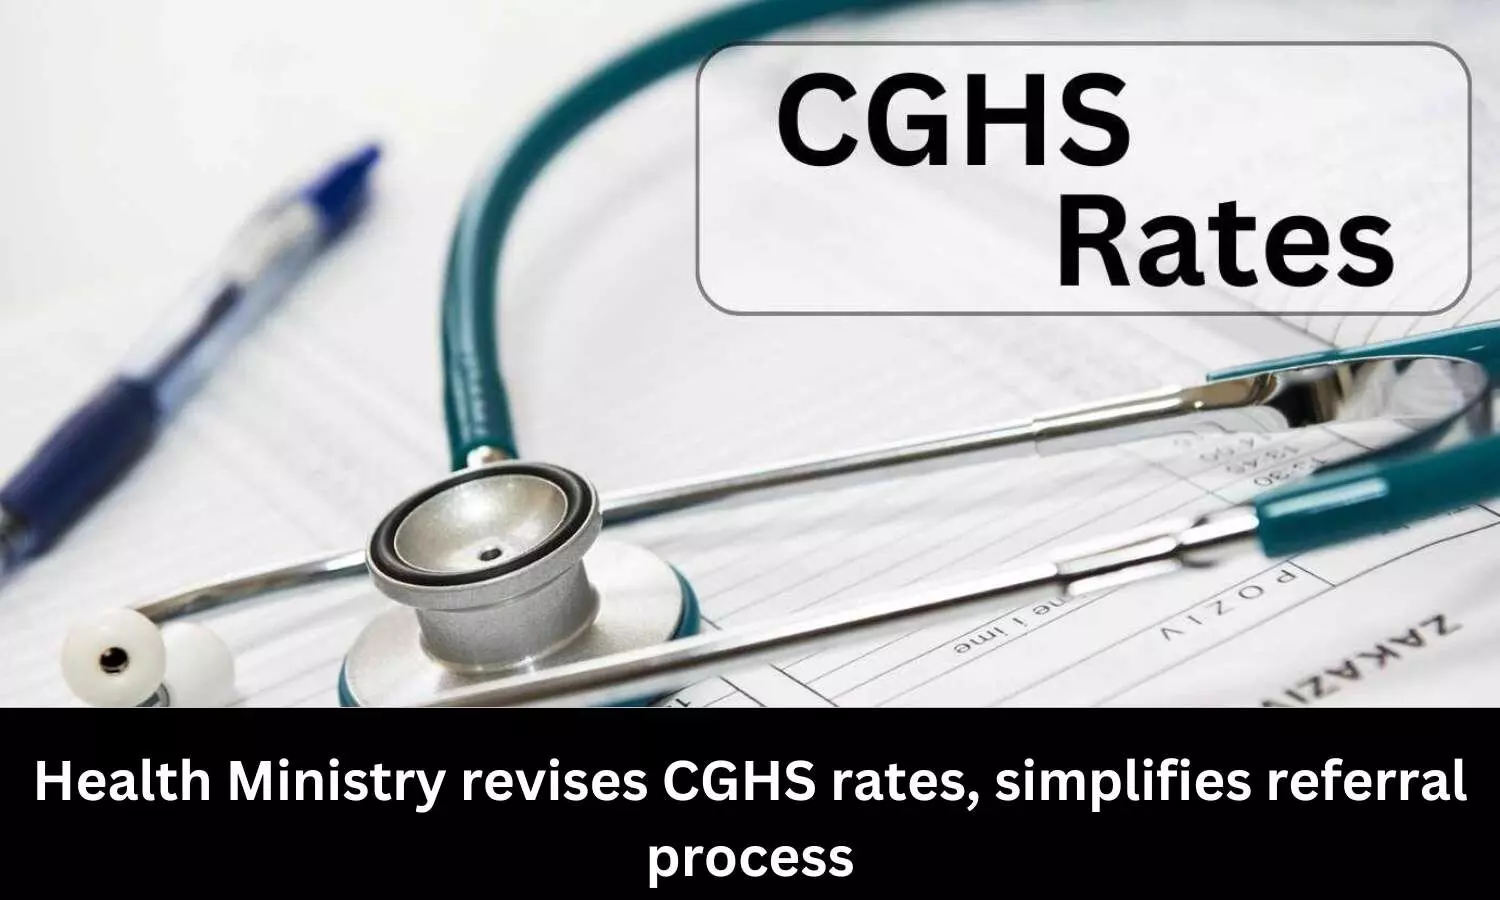 Health Ministry revises CGHS package rates for benefit of CGHS Beneficiaries